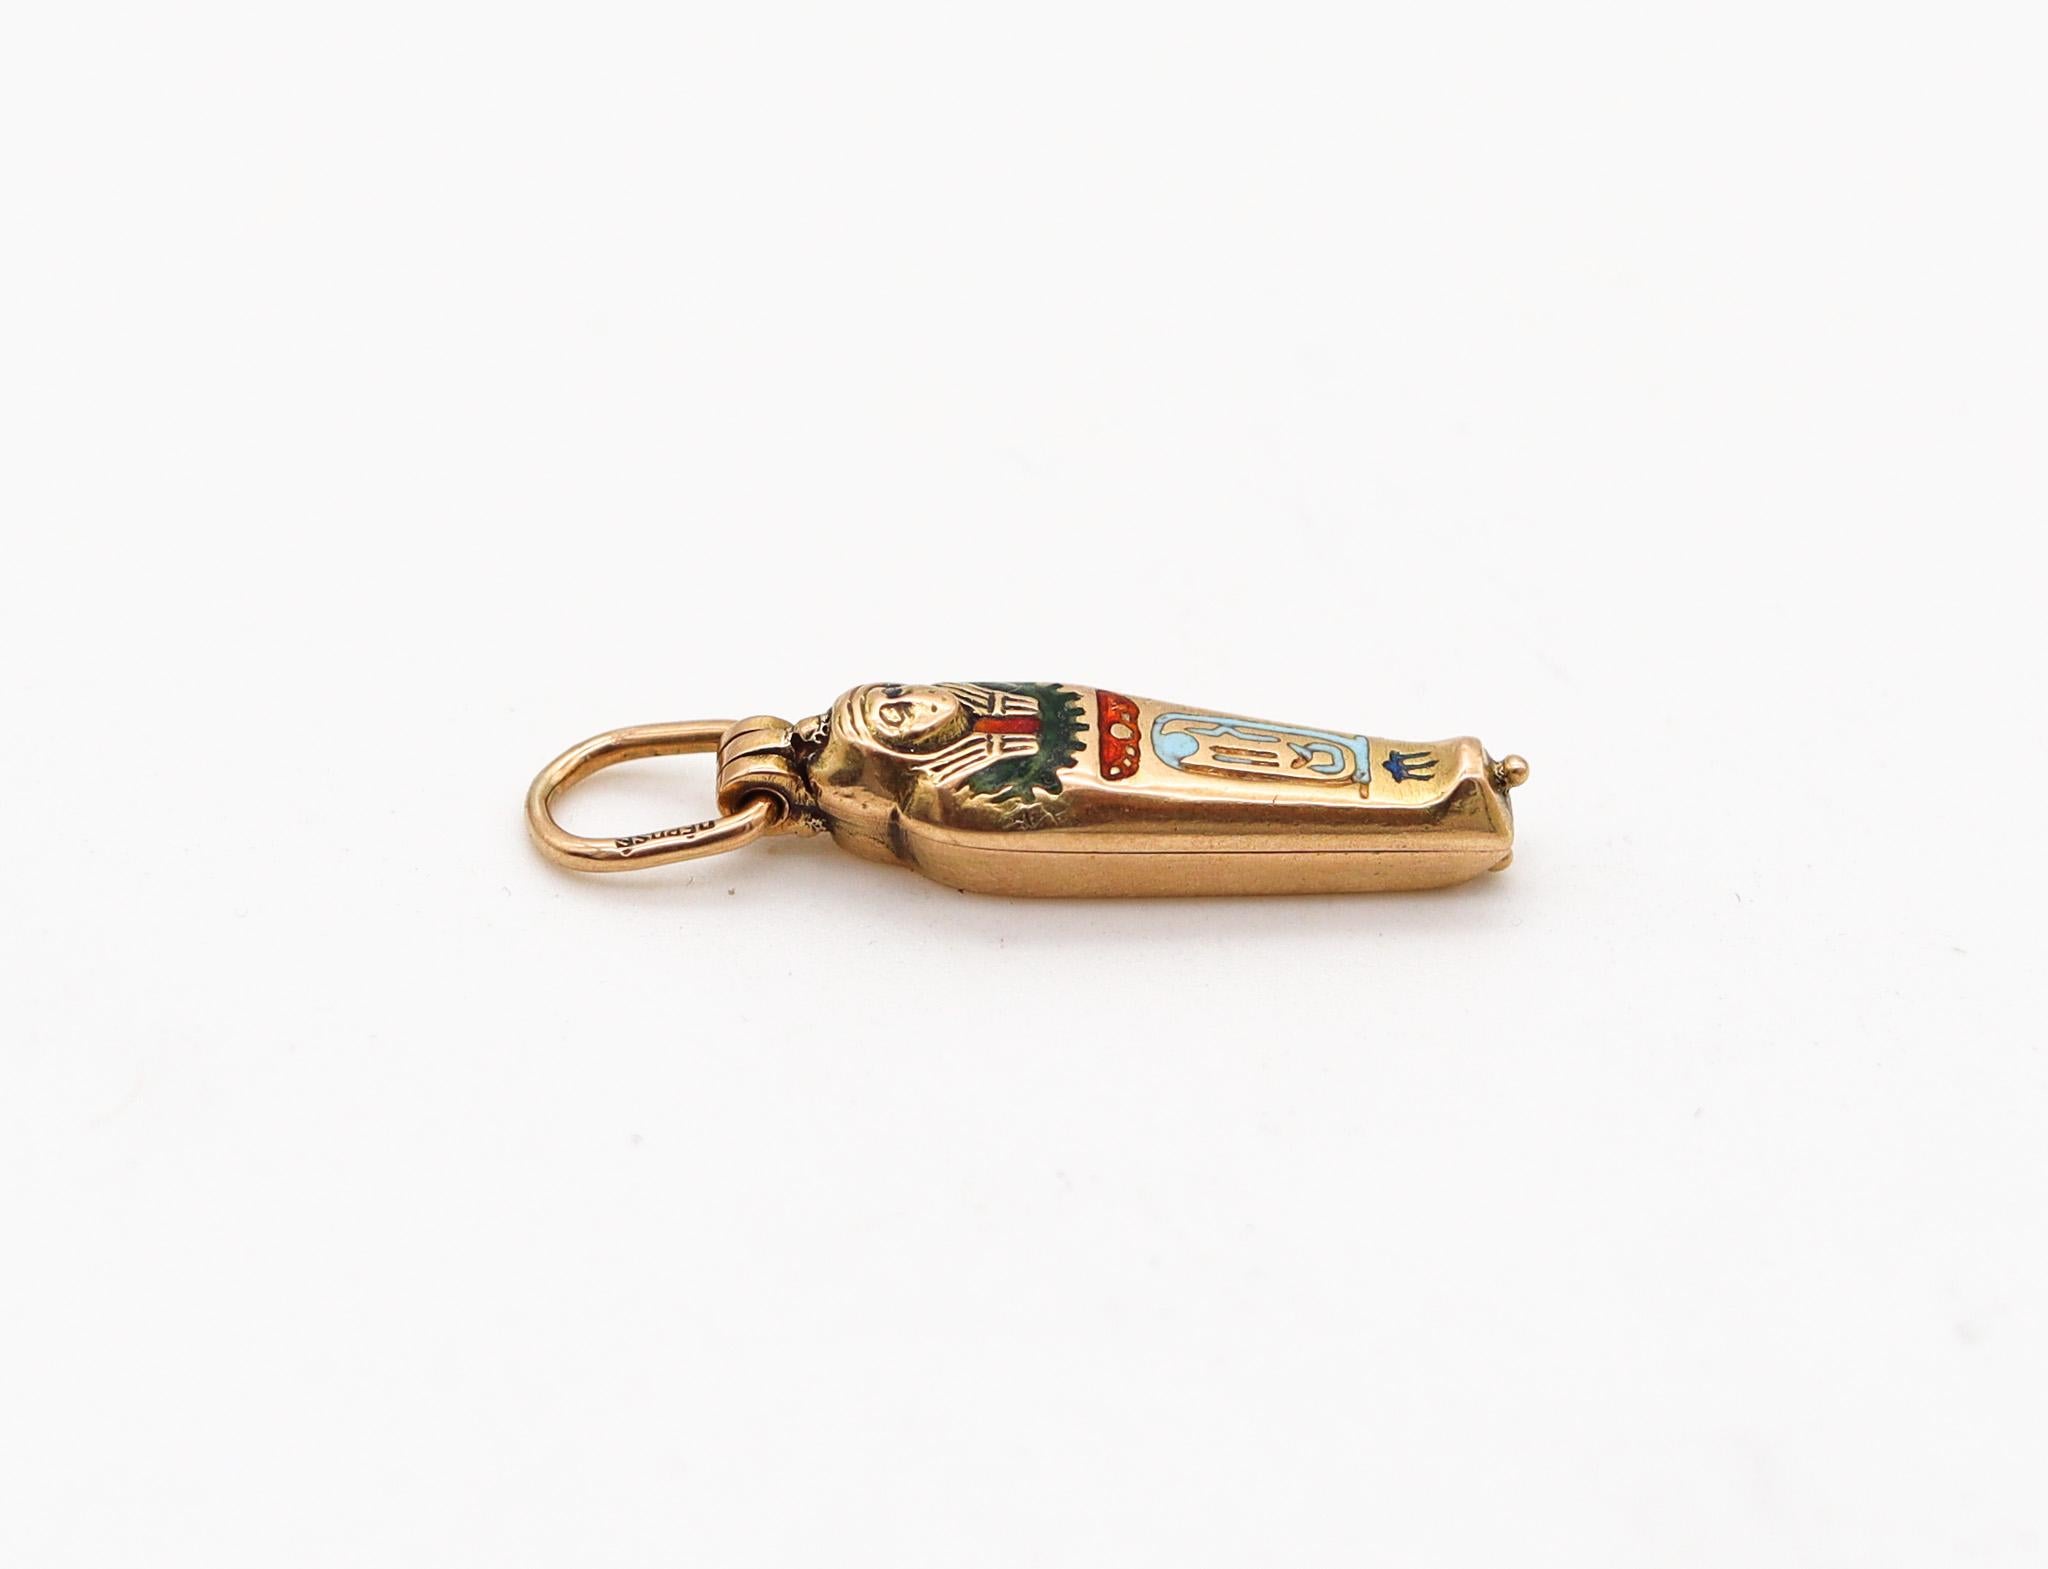 Egyptian revival Sarcophagus surprise charm.

With the discovery of King Tutankhamun's tomb in 1922, Egyptian Revival souvenirs became incredibly popular in the world. This fantastic surprise sarcophagus charm is one of them and one of the most